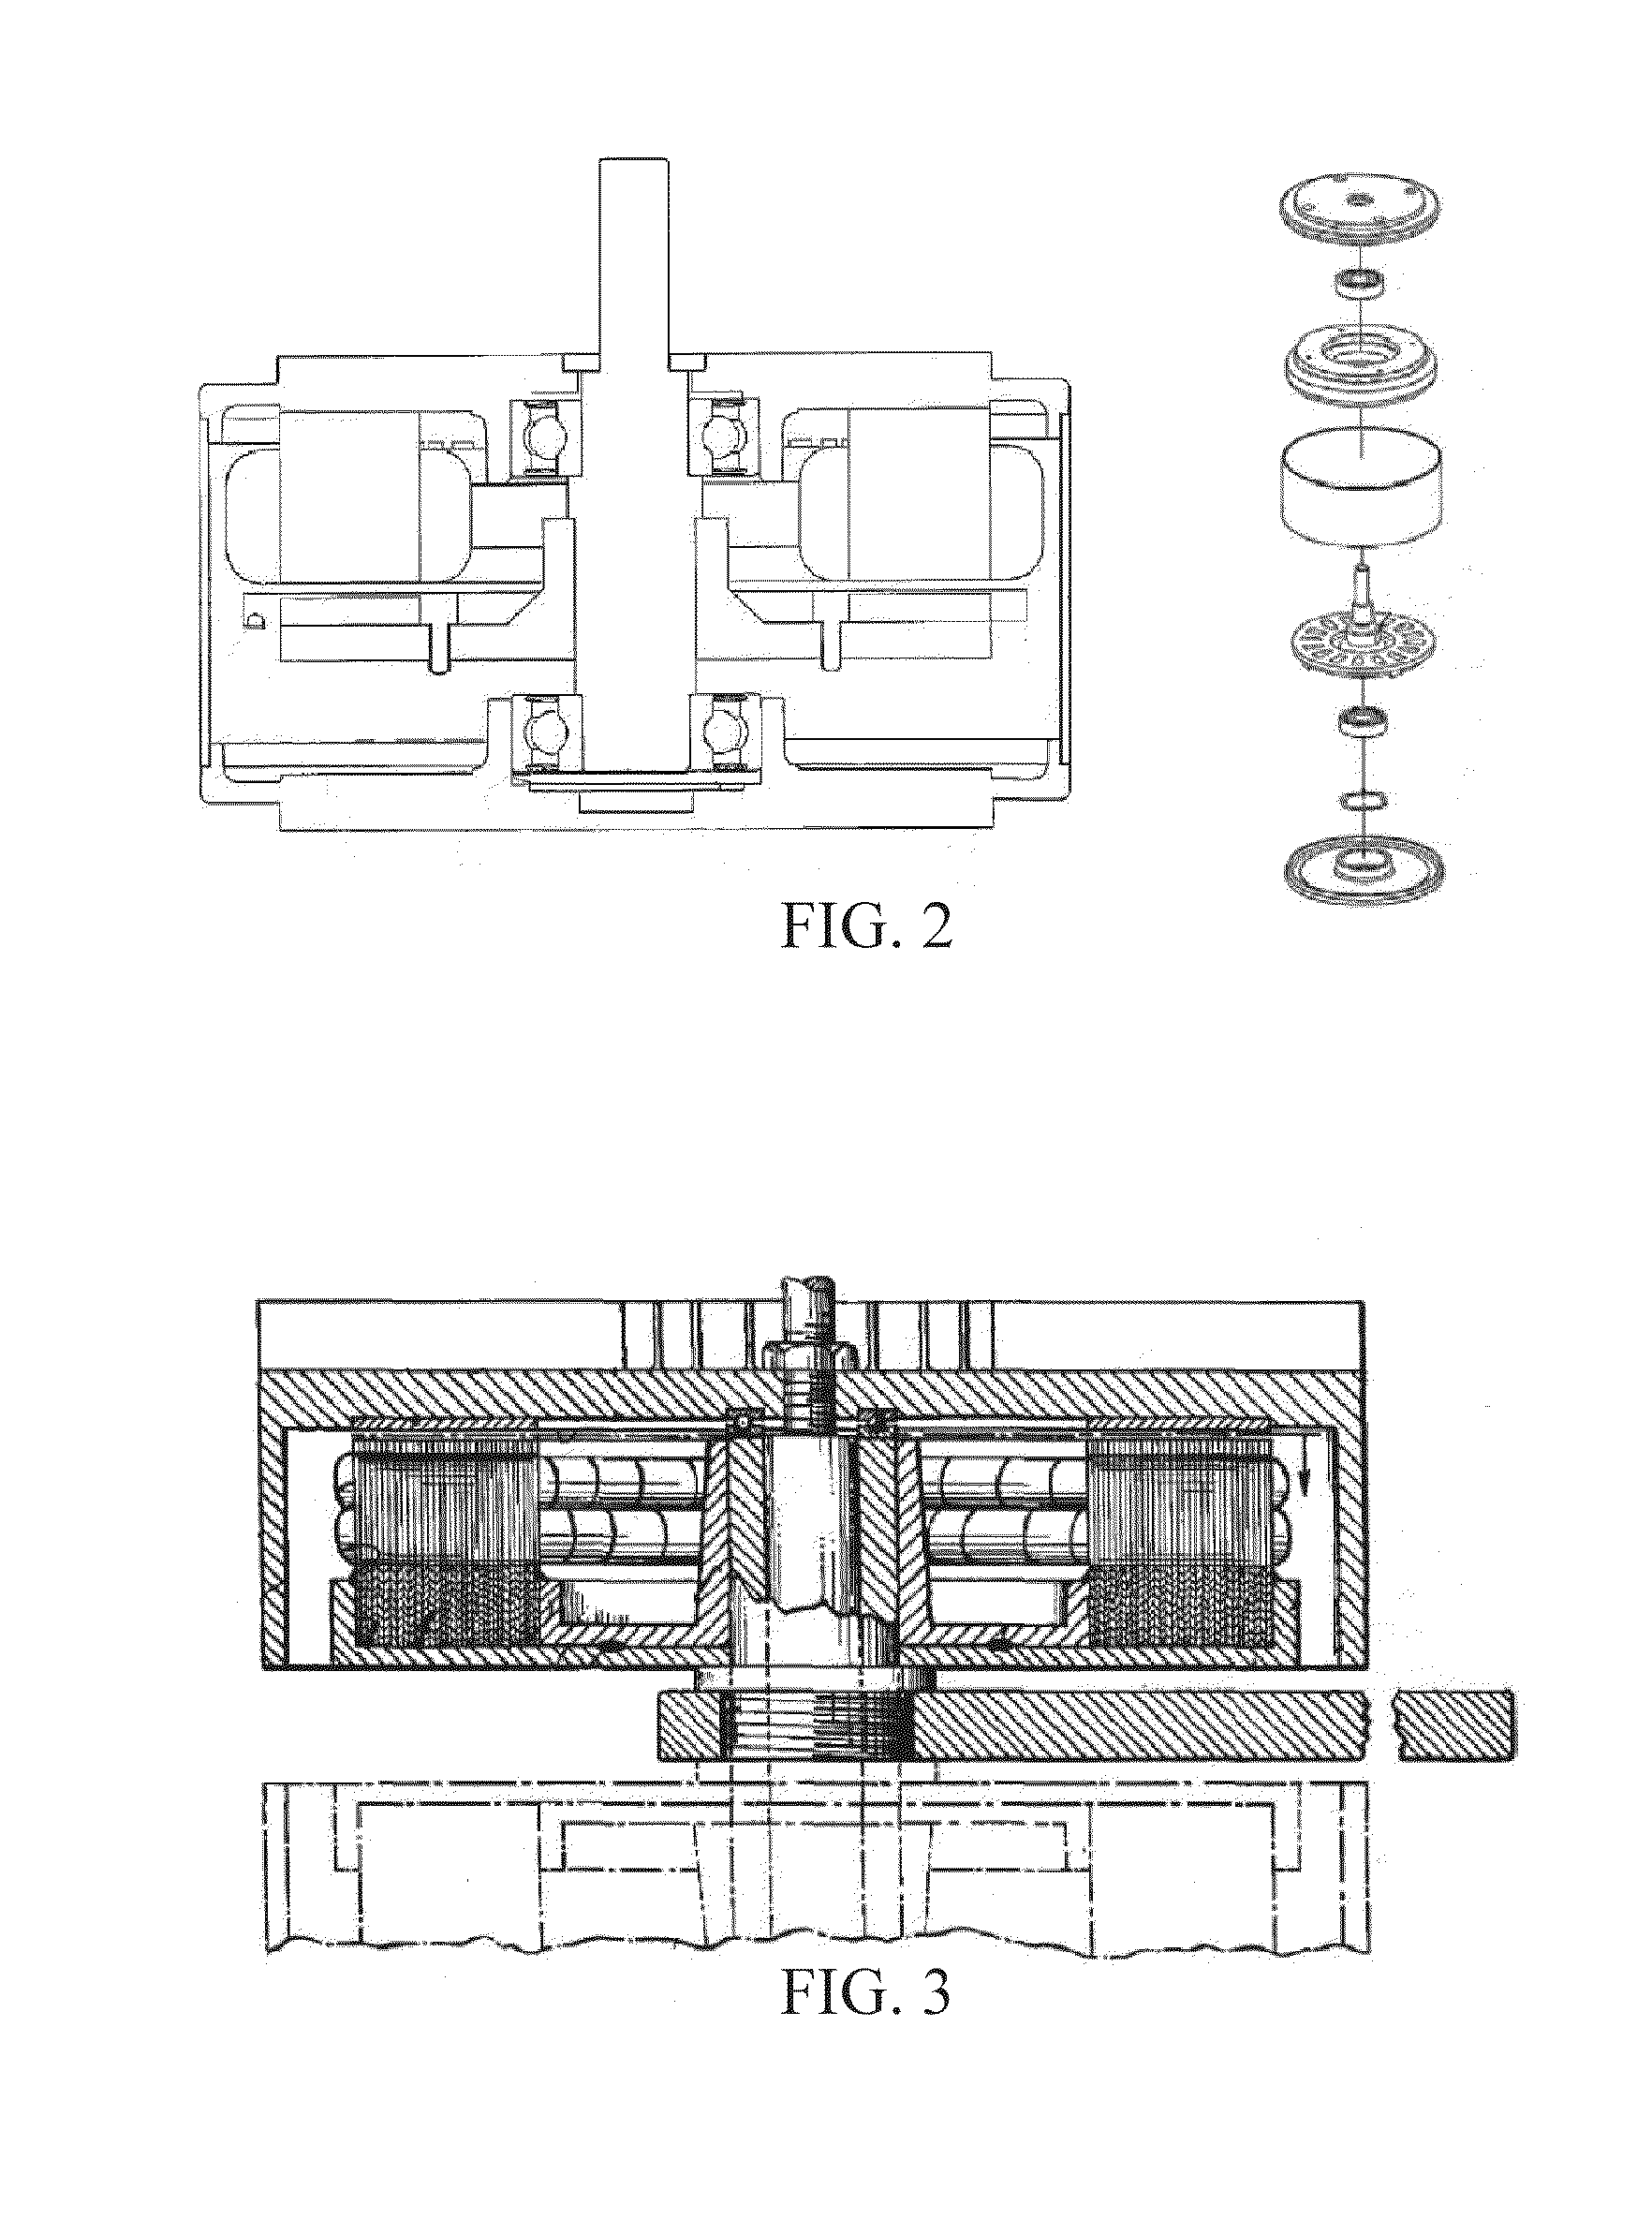 Stator assembly structure for axial flux electric machine